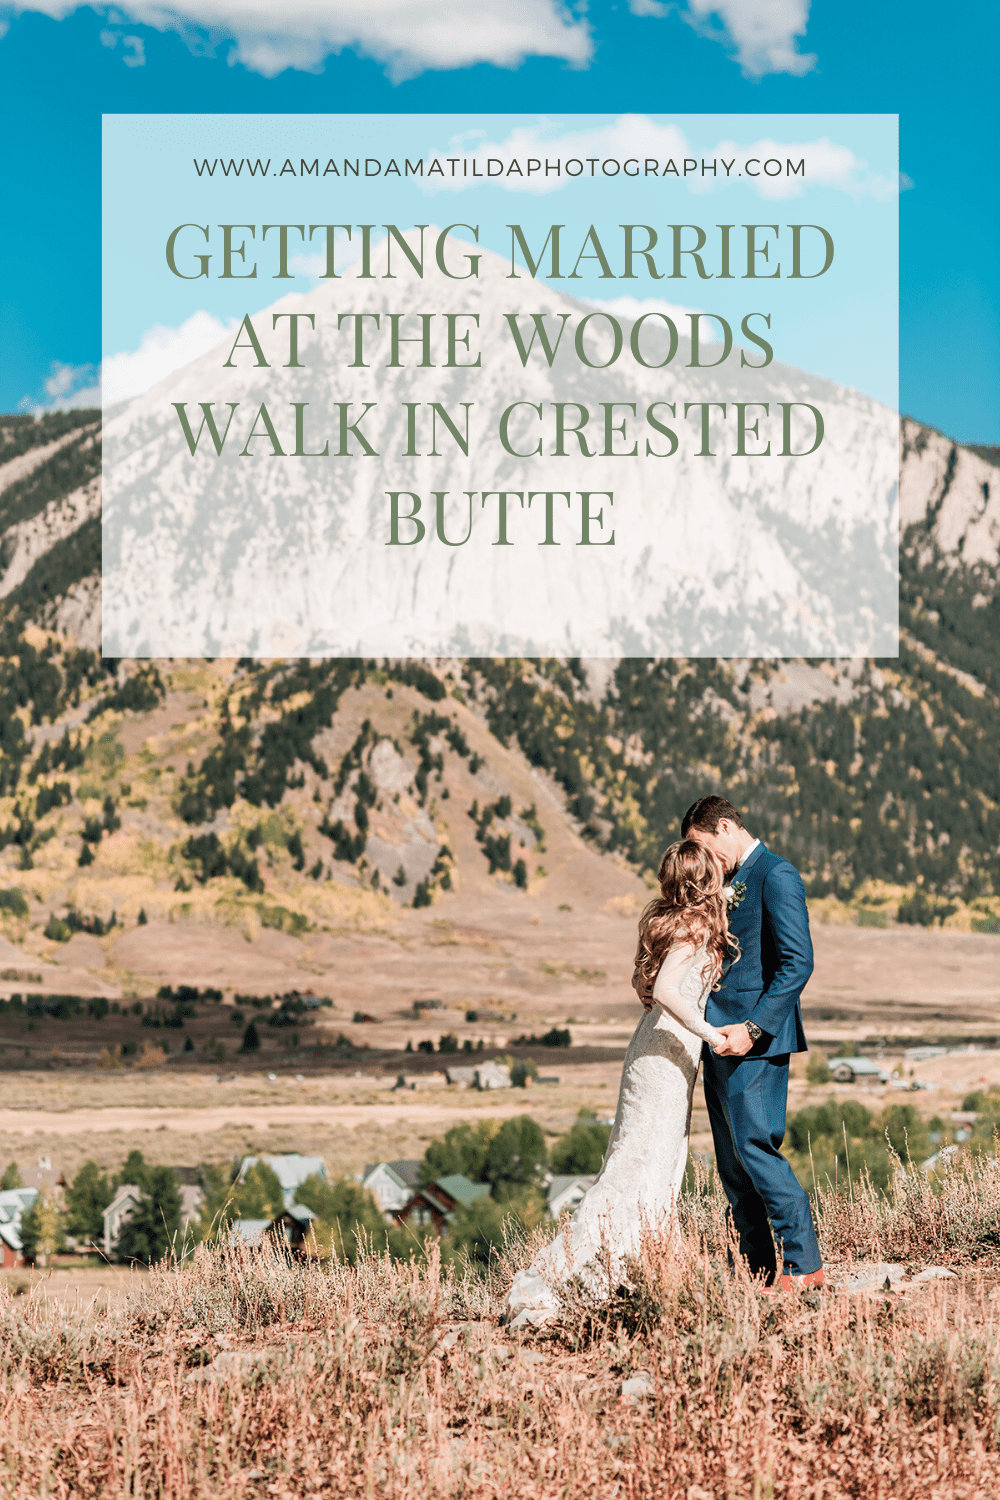 Getting Married at the Woods Walk in Crested Butte